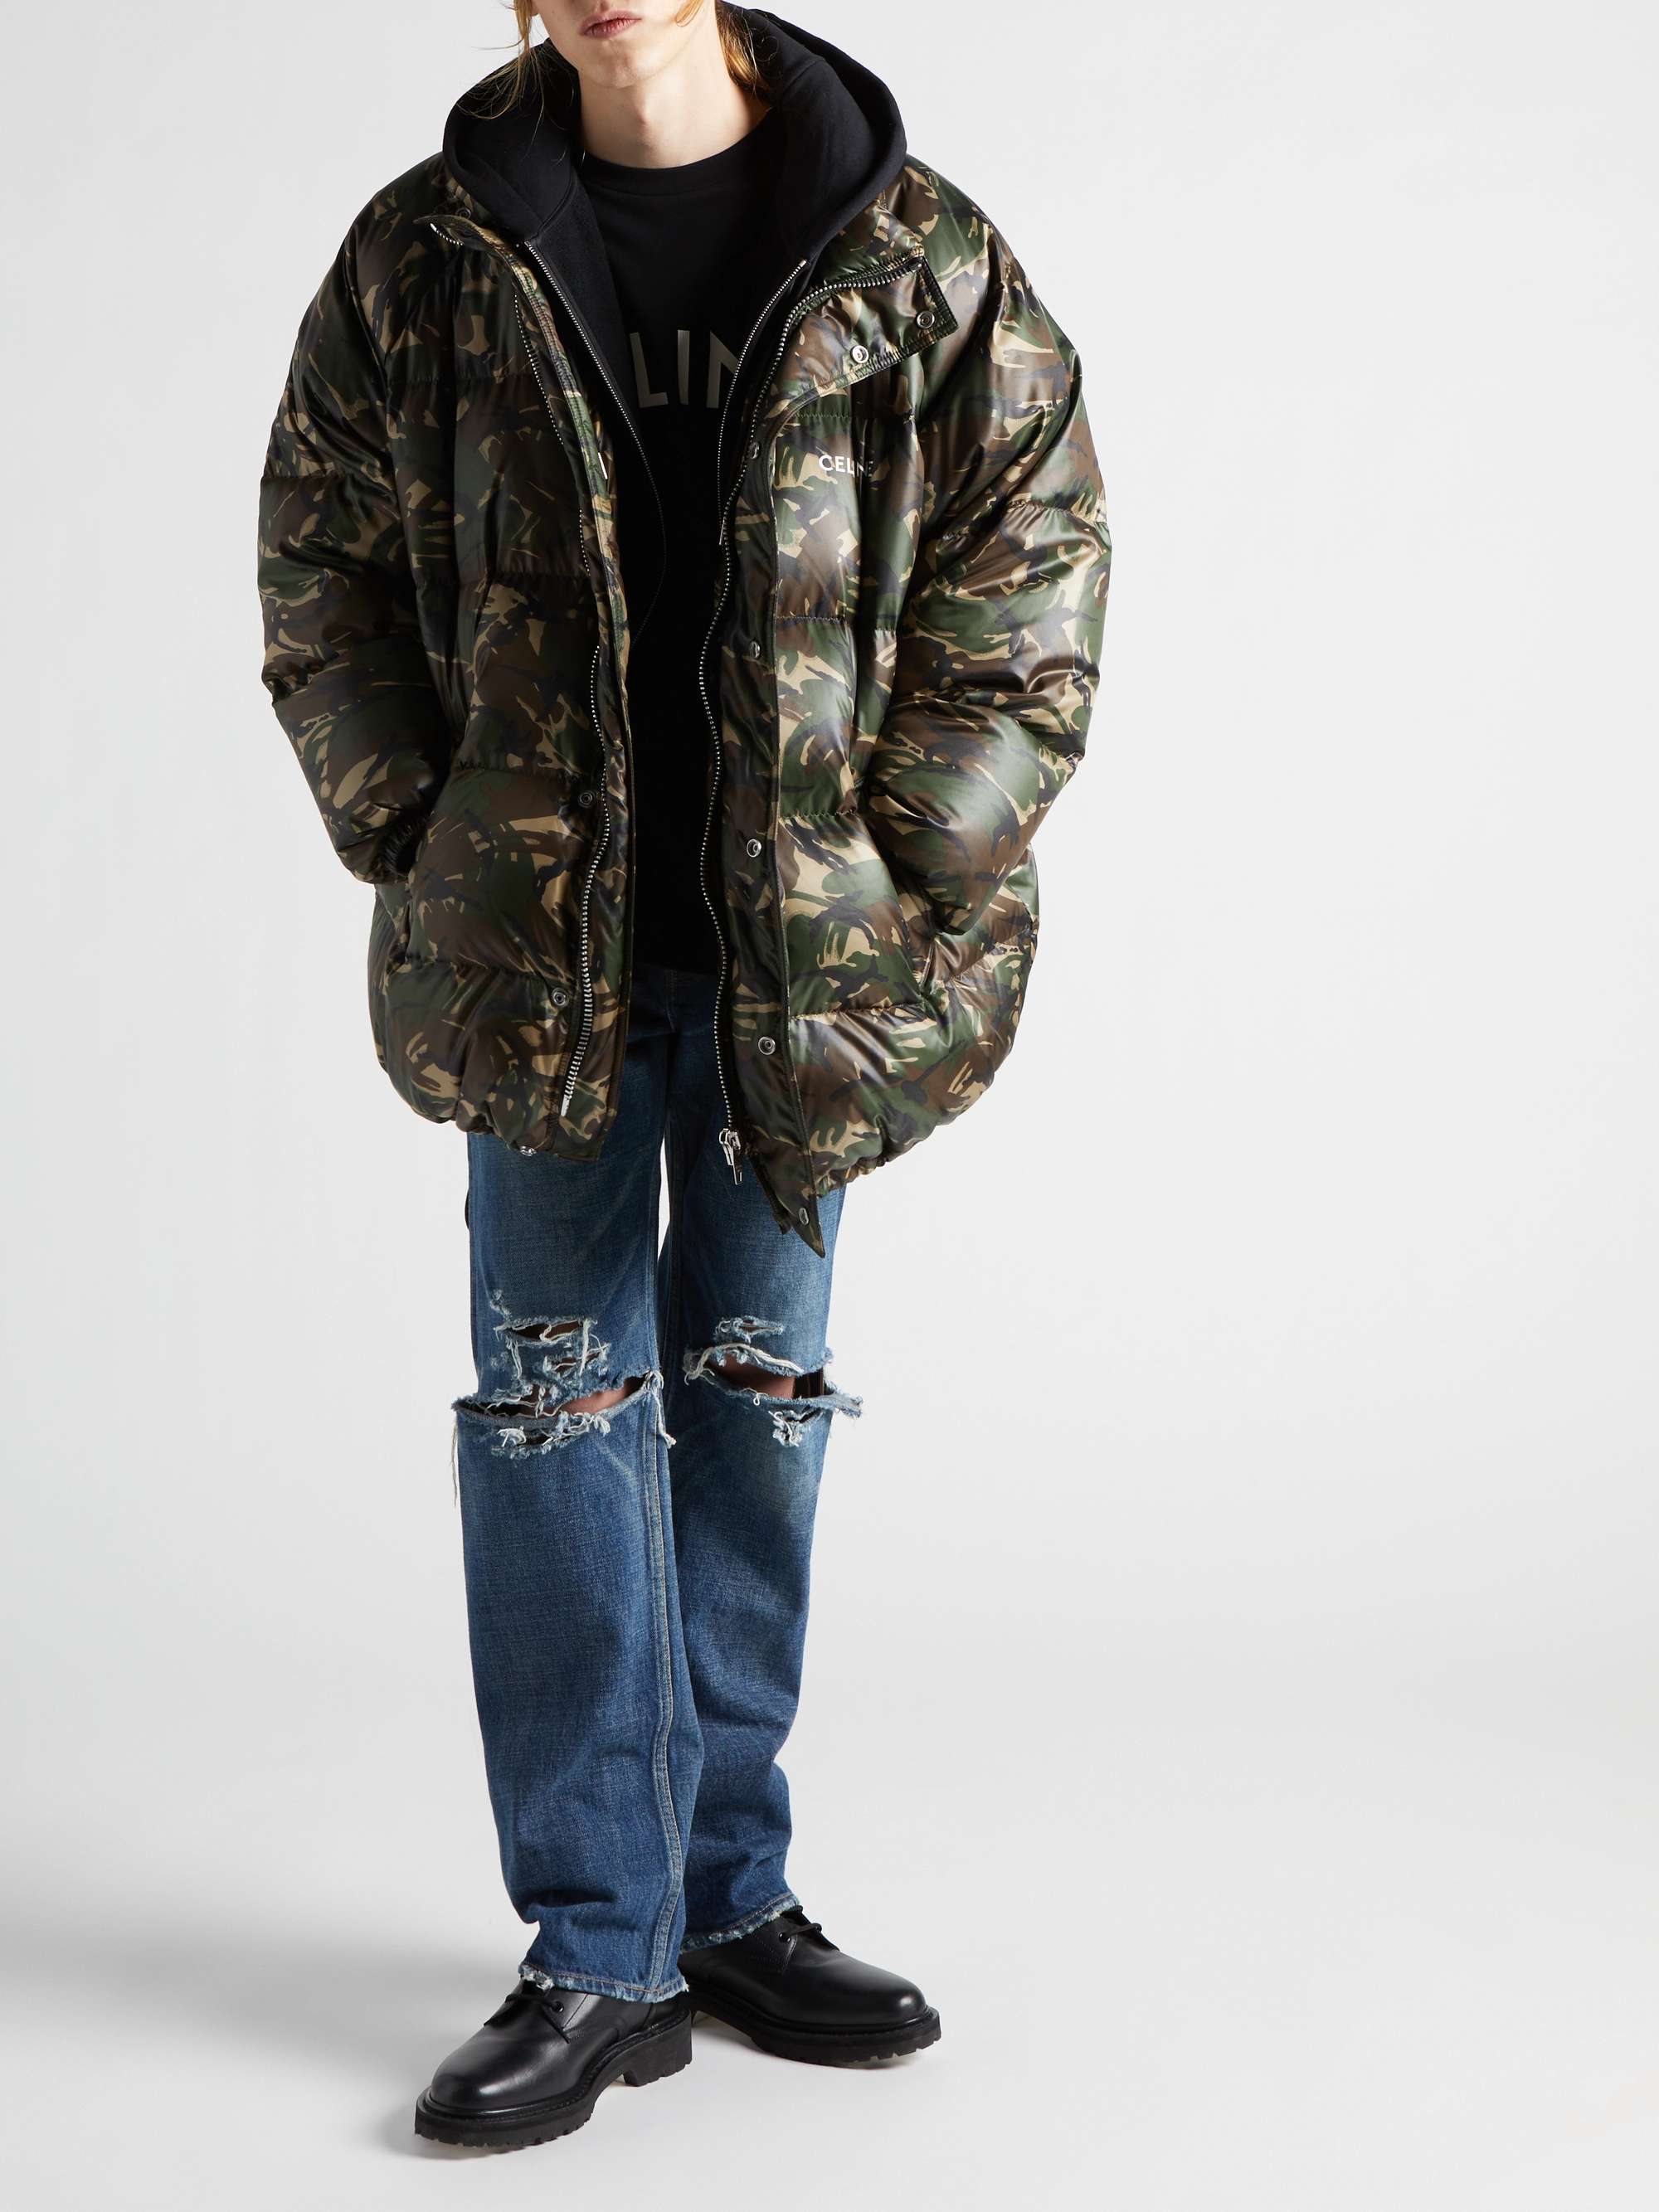 CELINE HOMME Quilted Camouflage-Print Shell Jacket